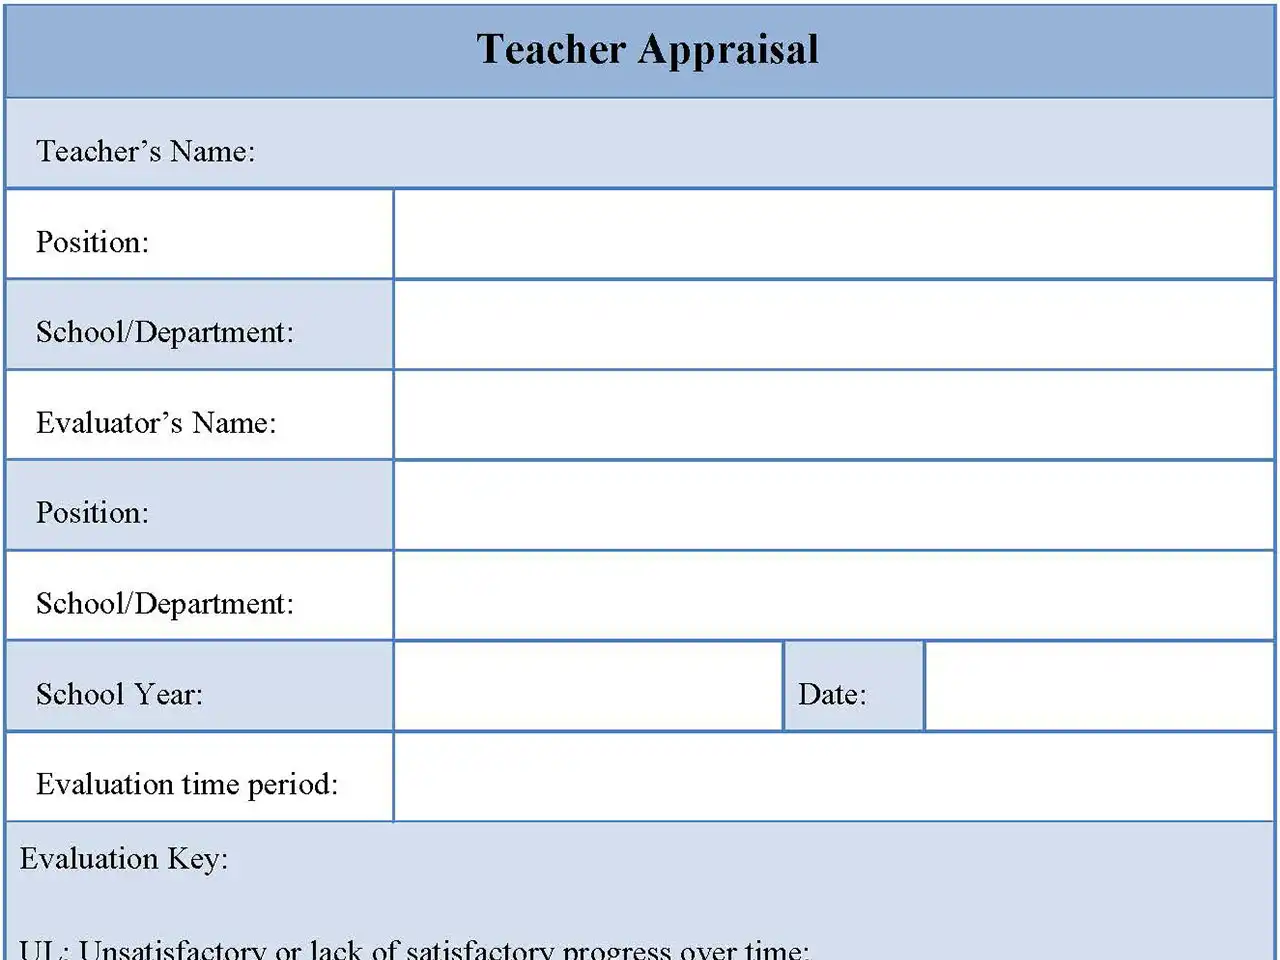 Teacher Appraisal Fillable PDF Form And Word Document